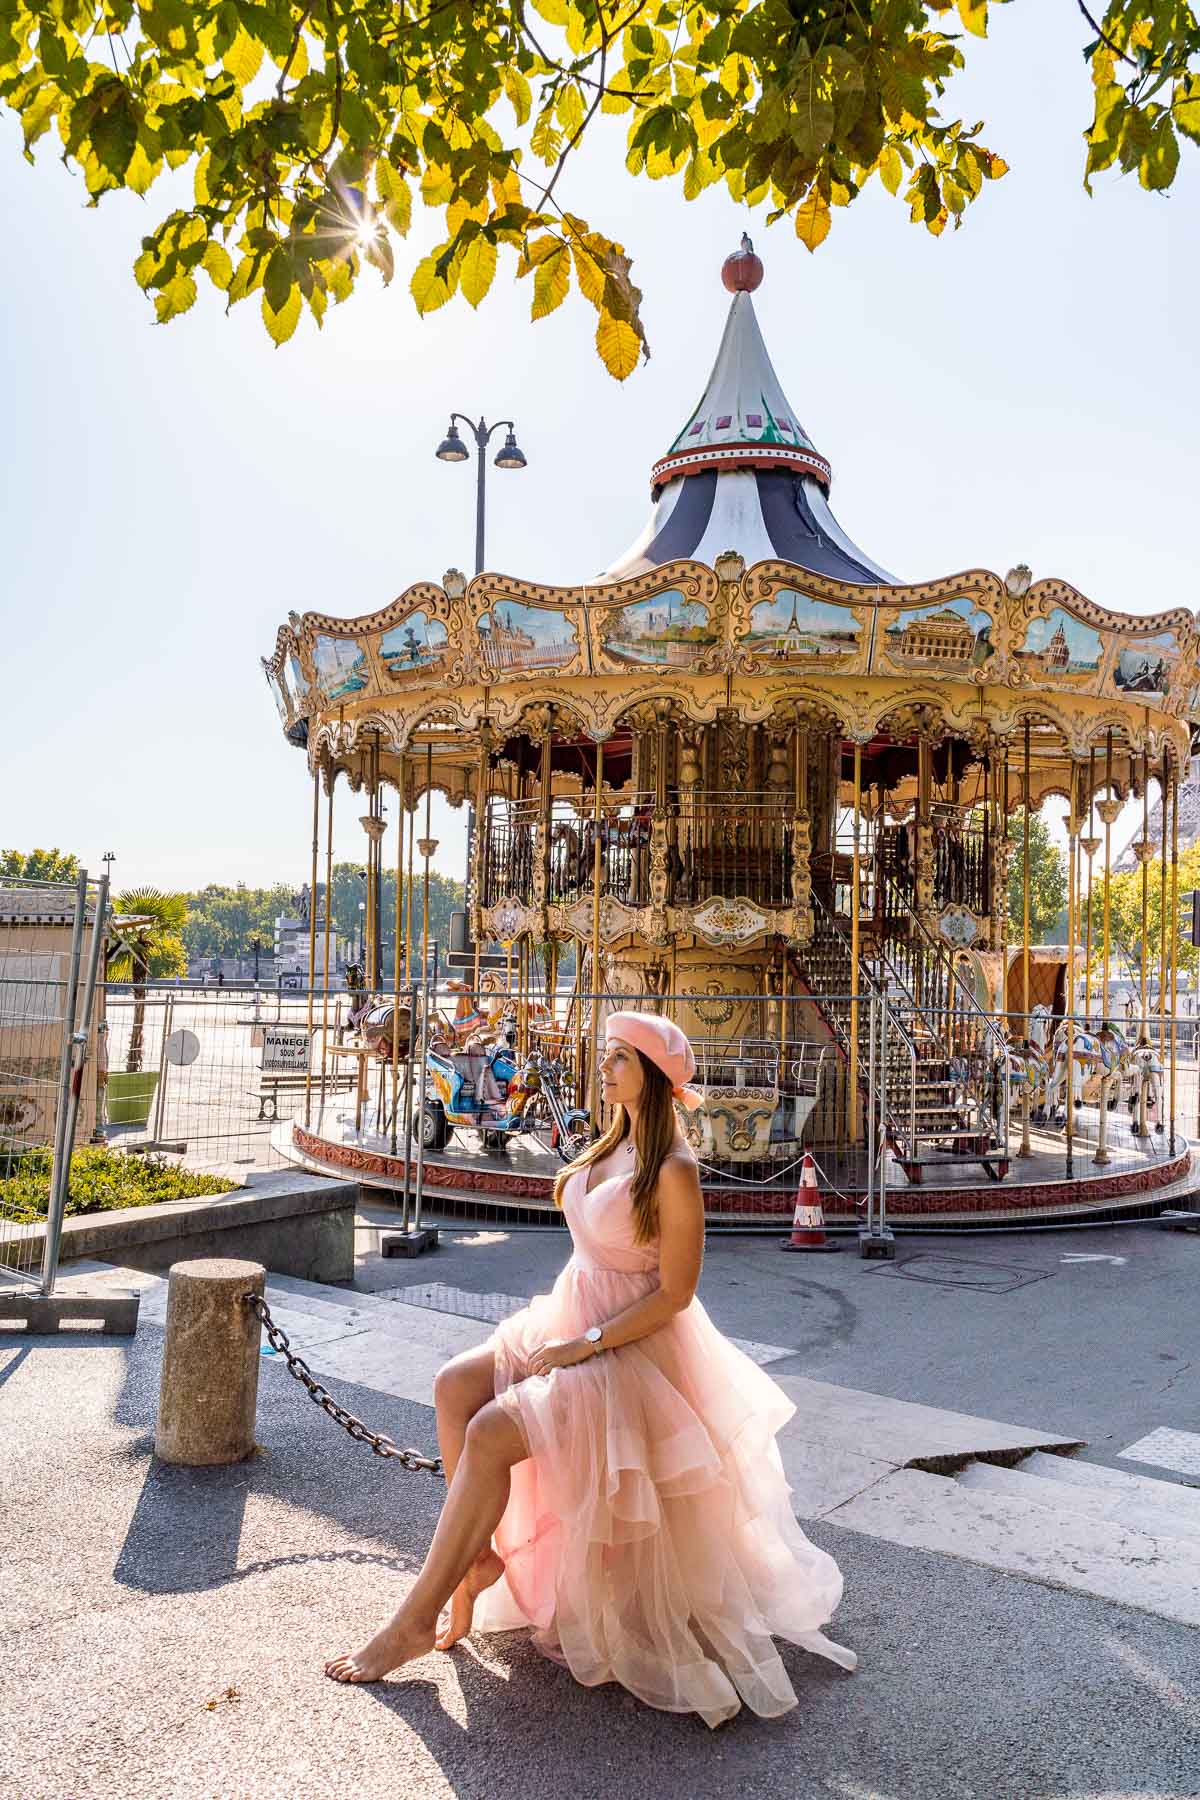 Girl in a pink dress sitting in front of a carousel near Trocadero in Paris